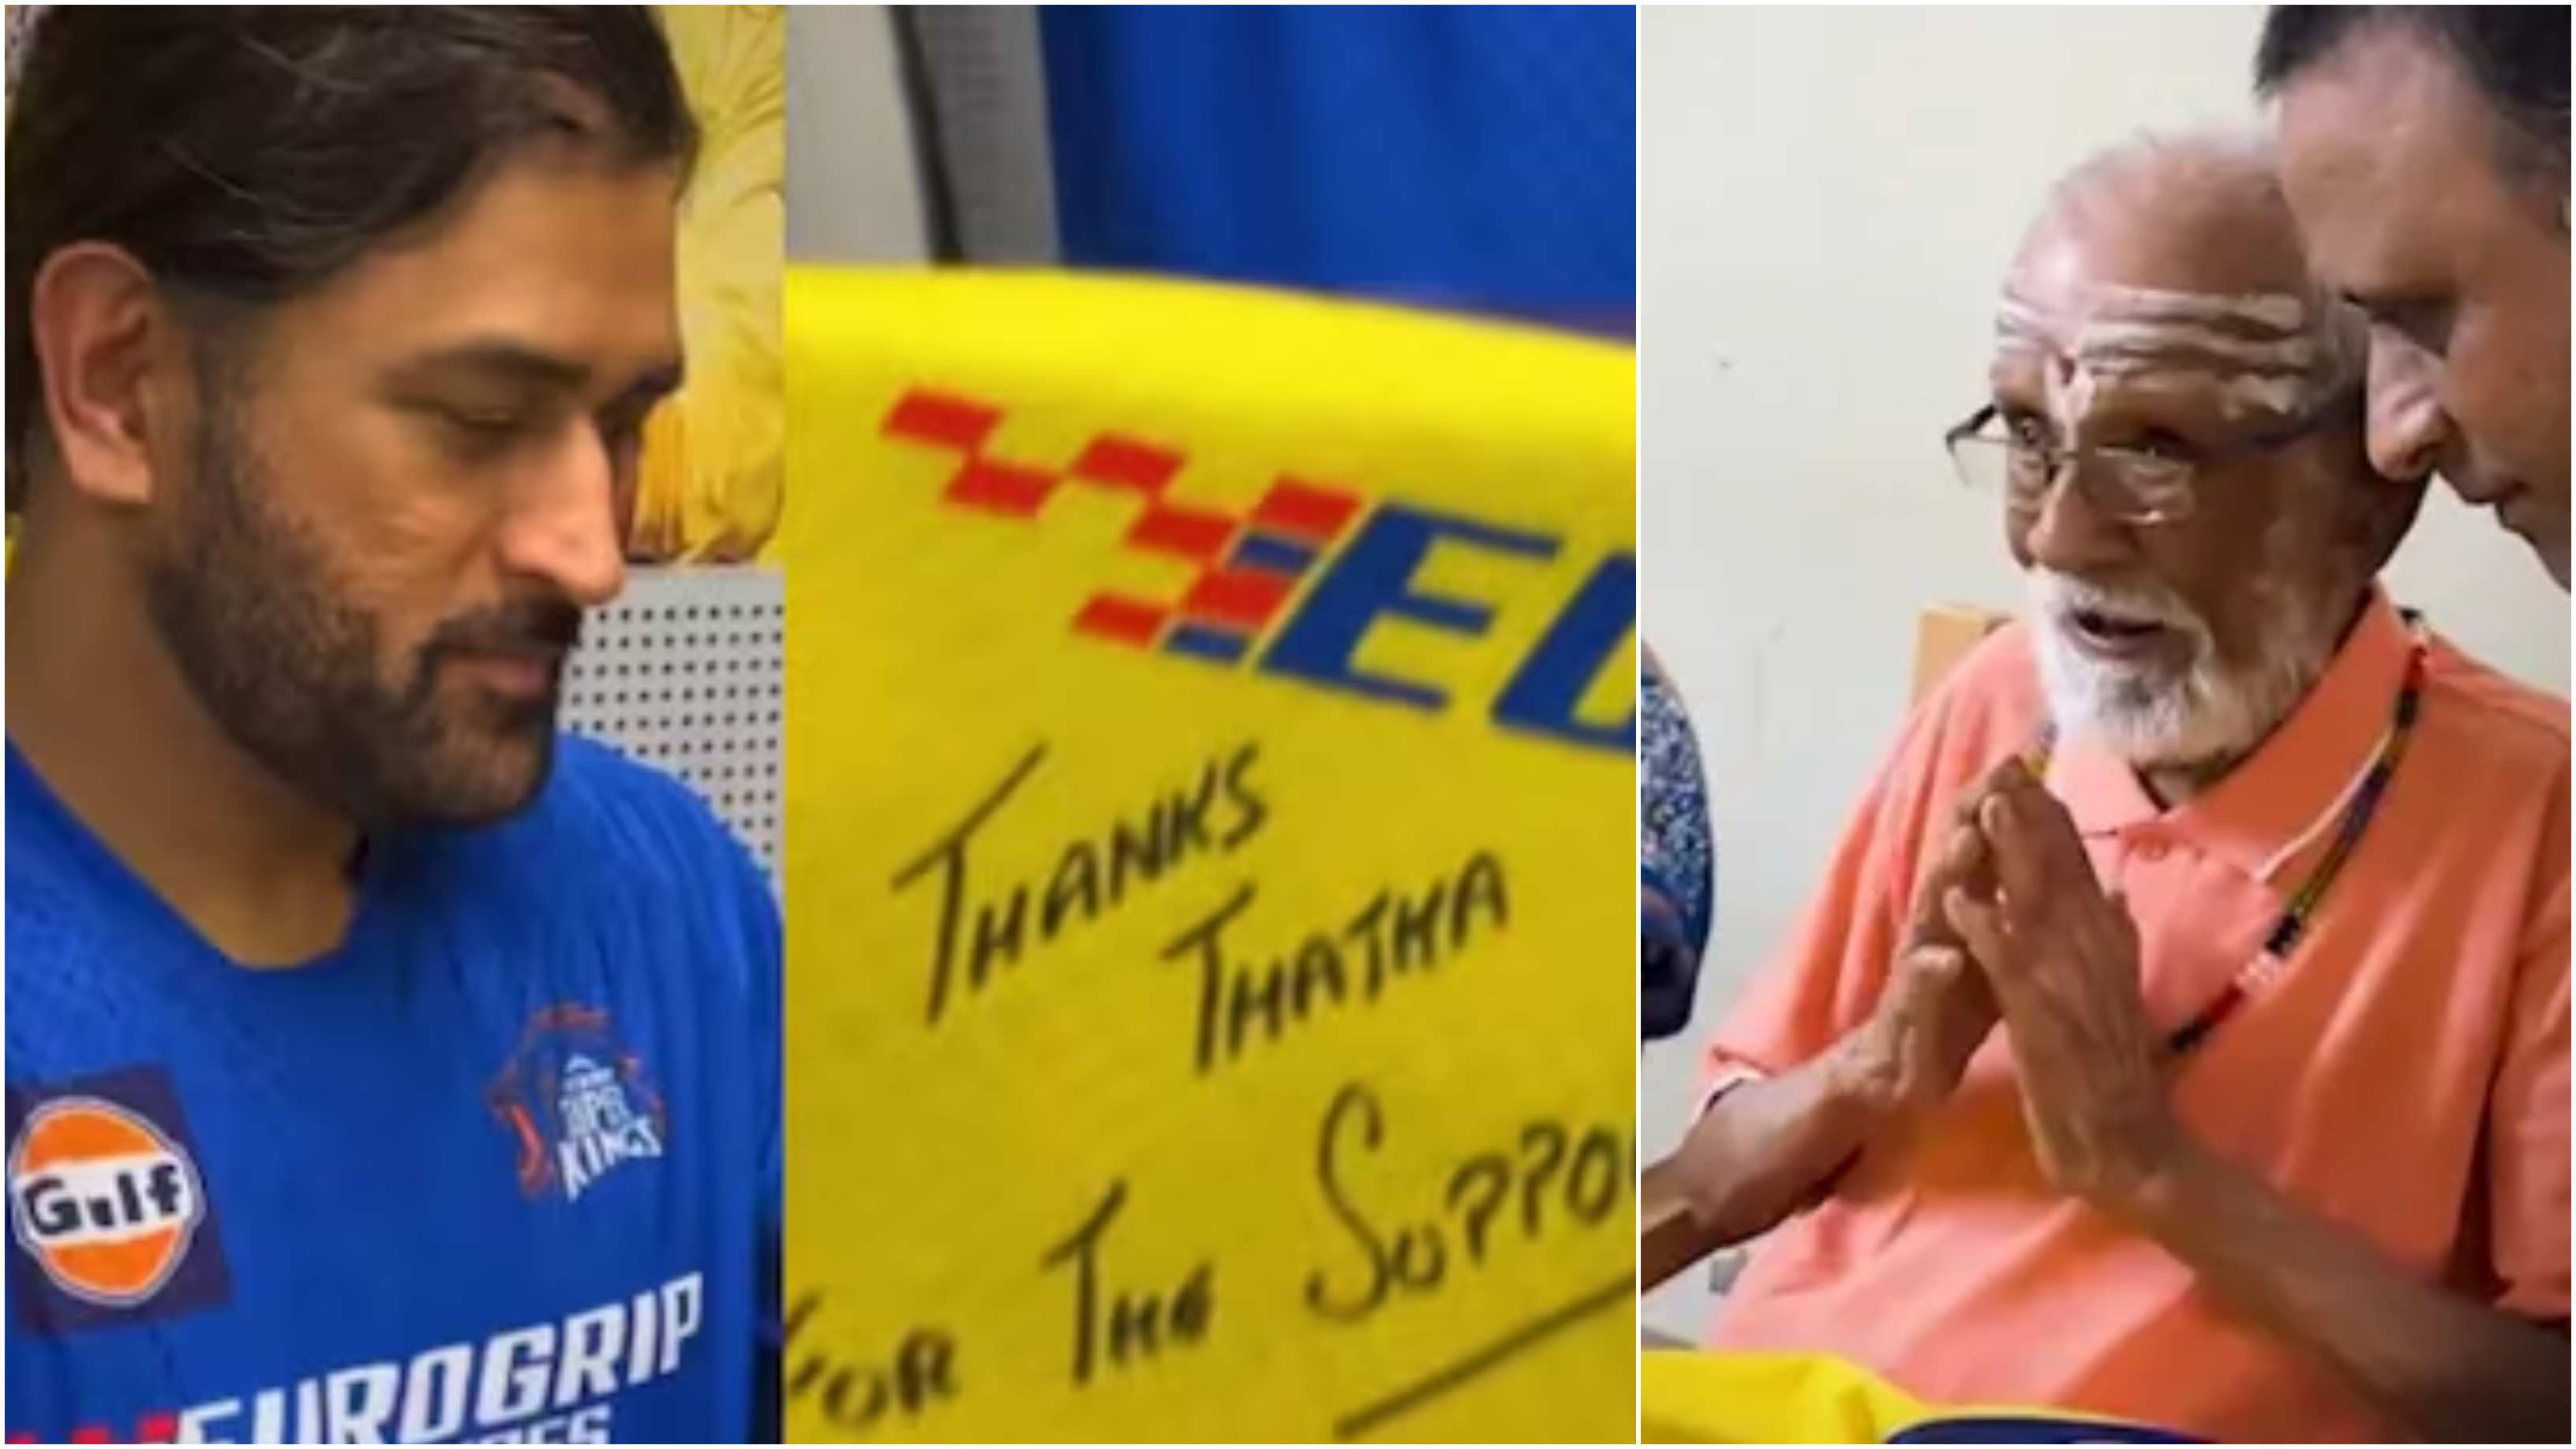 MS Dhoni signed special jersey for his 103-year-old superfan | CSK